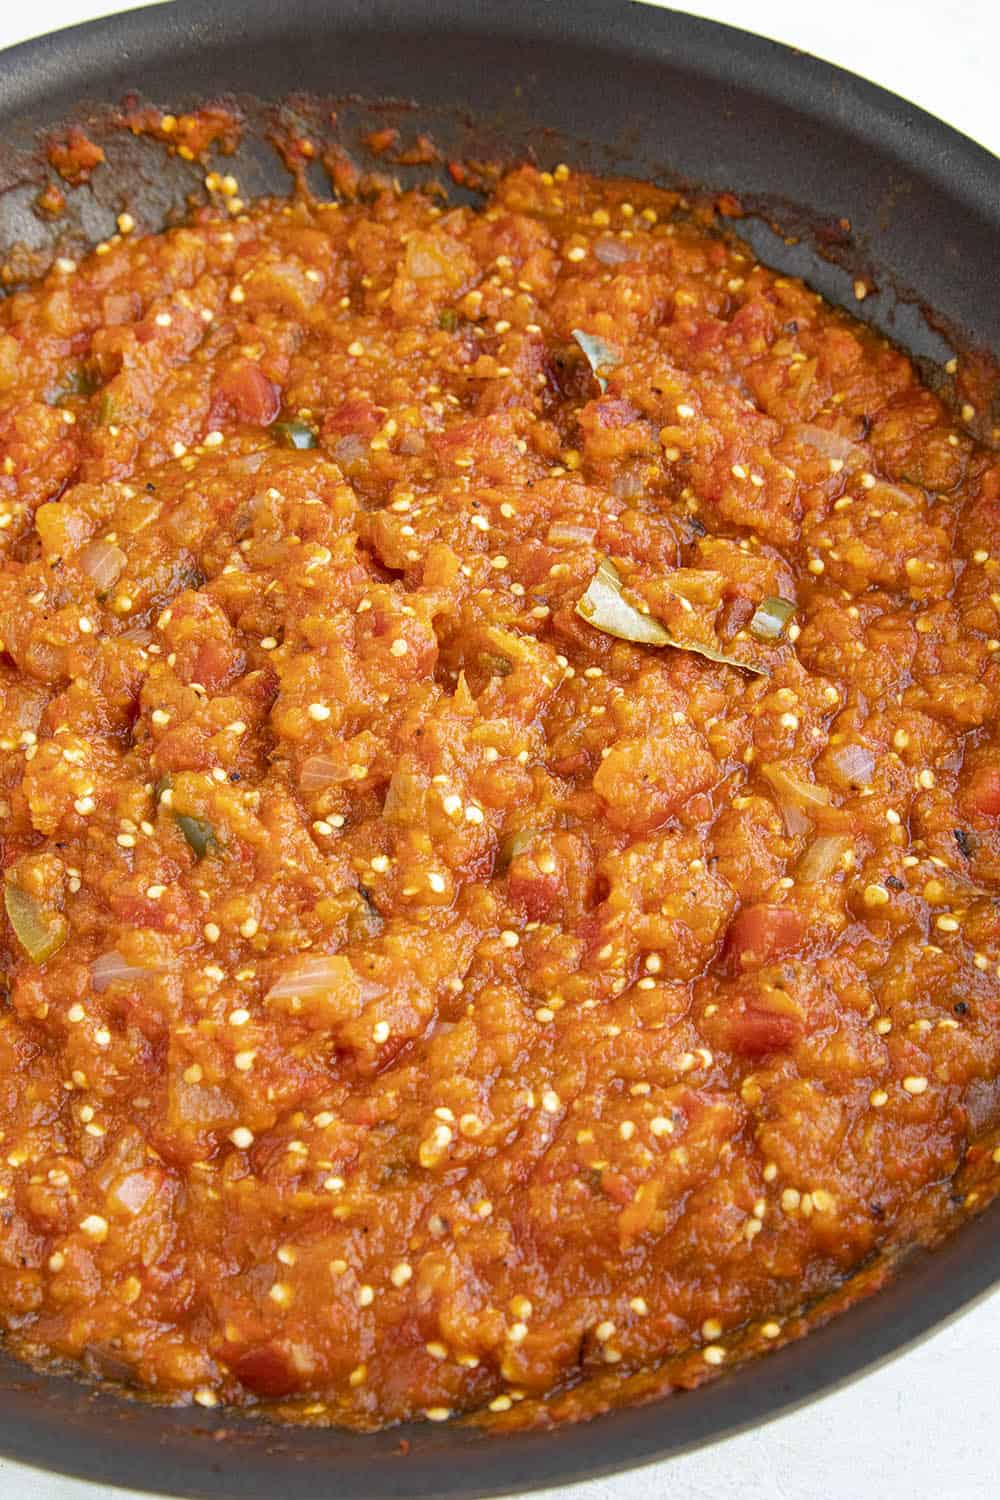 Zacusca simmering in a pan